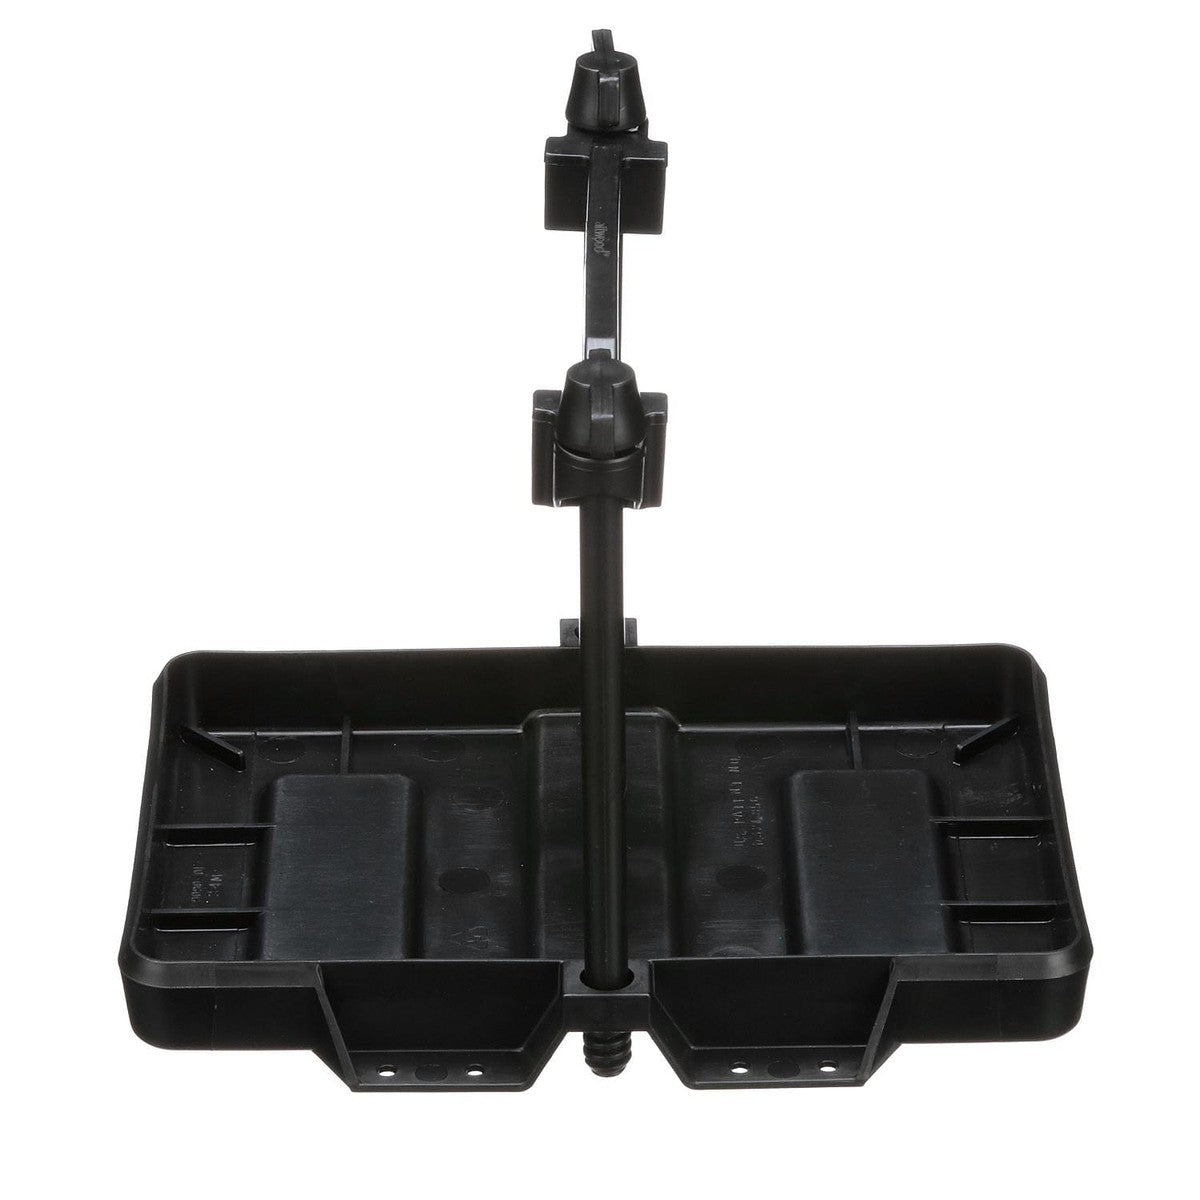 Attwood Marine Qualifies for Free Shipping Attwood Adjustable Battery Tray 24 Series #9090-1